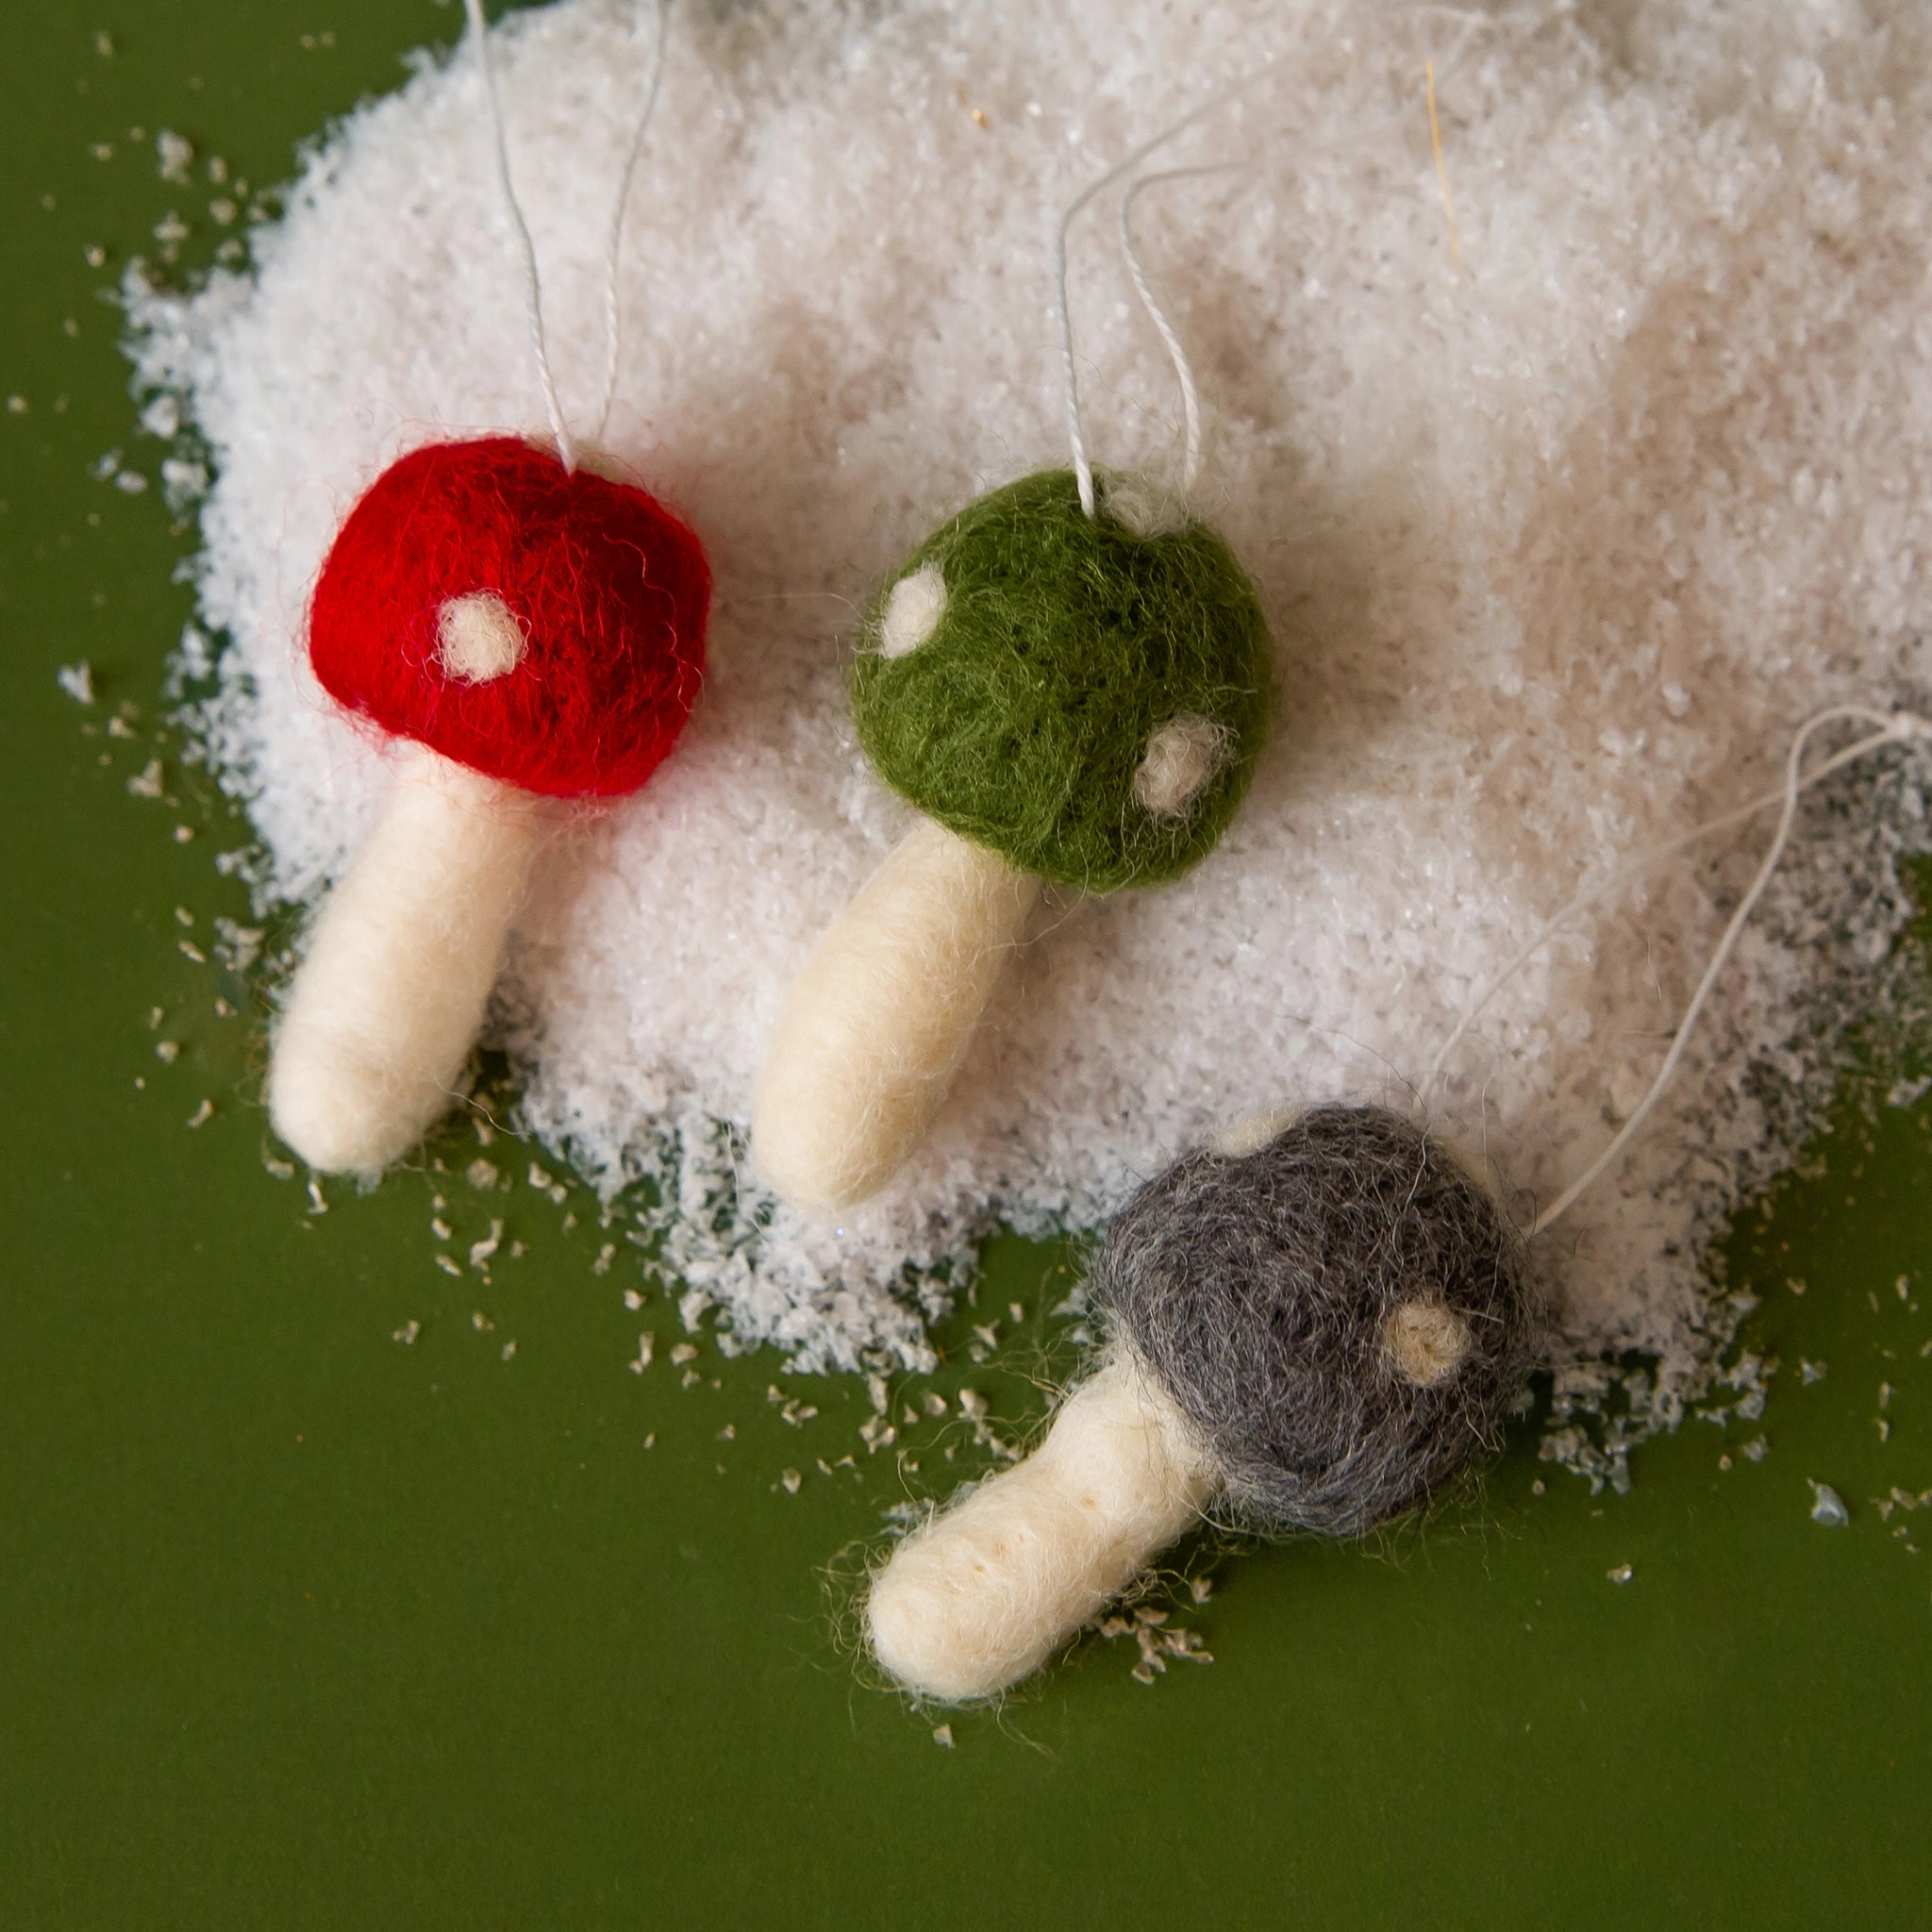 On a green snowy background is three felt mushrooms with a red, green or grey top with white spots. 